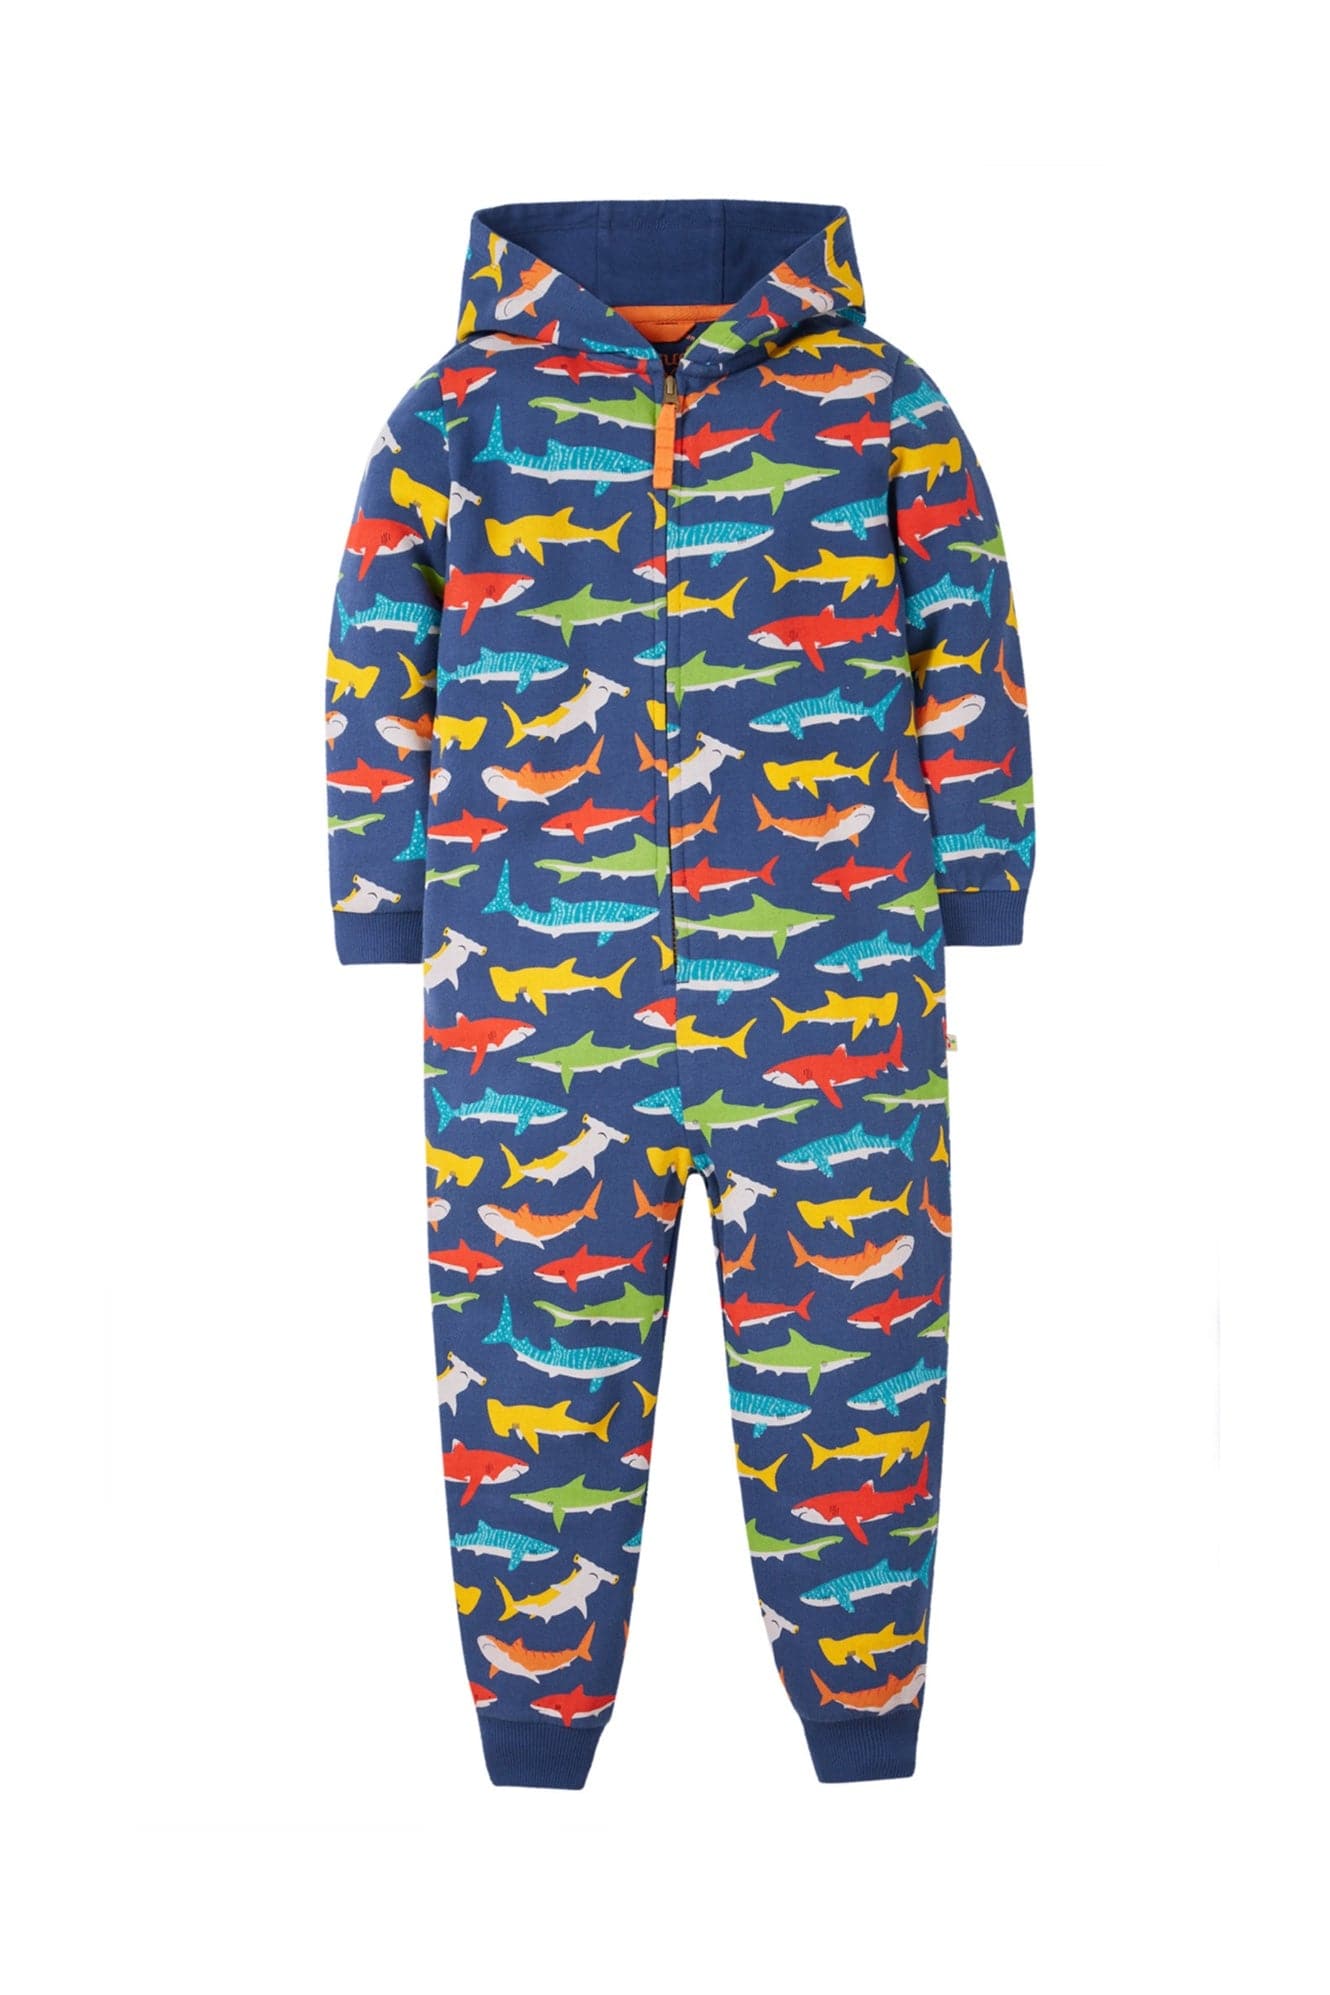 Switch Big Snuggle Suit Shiver Of Sharks